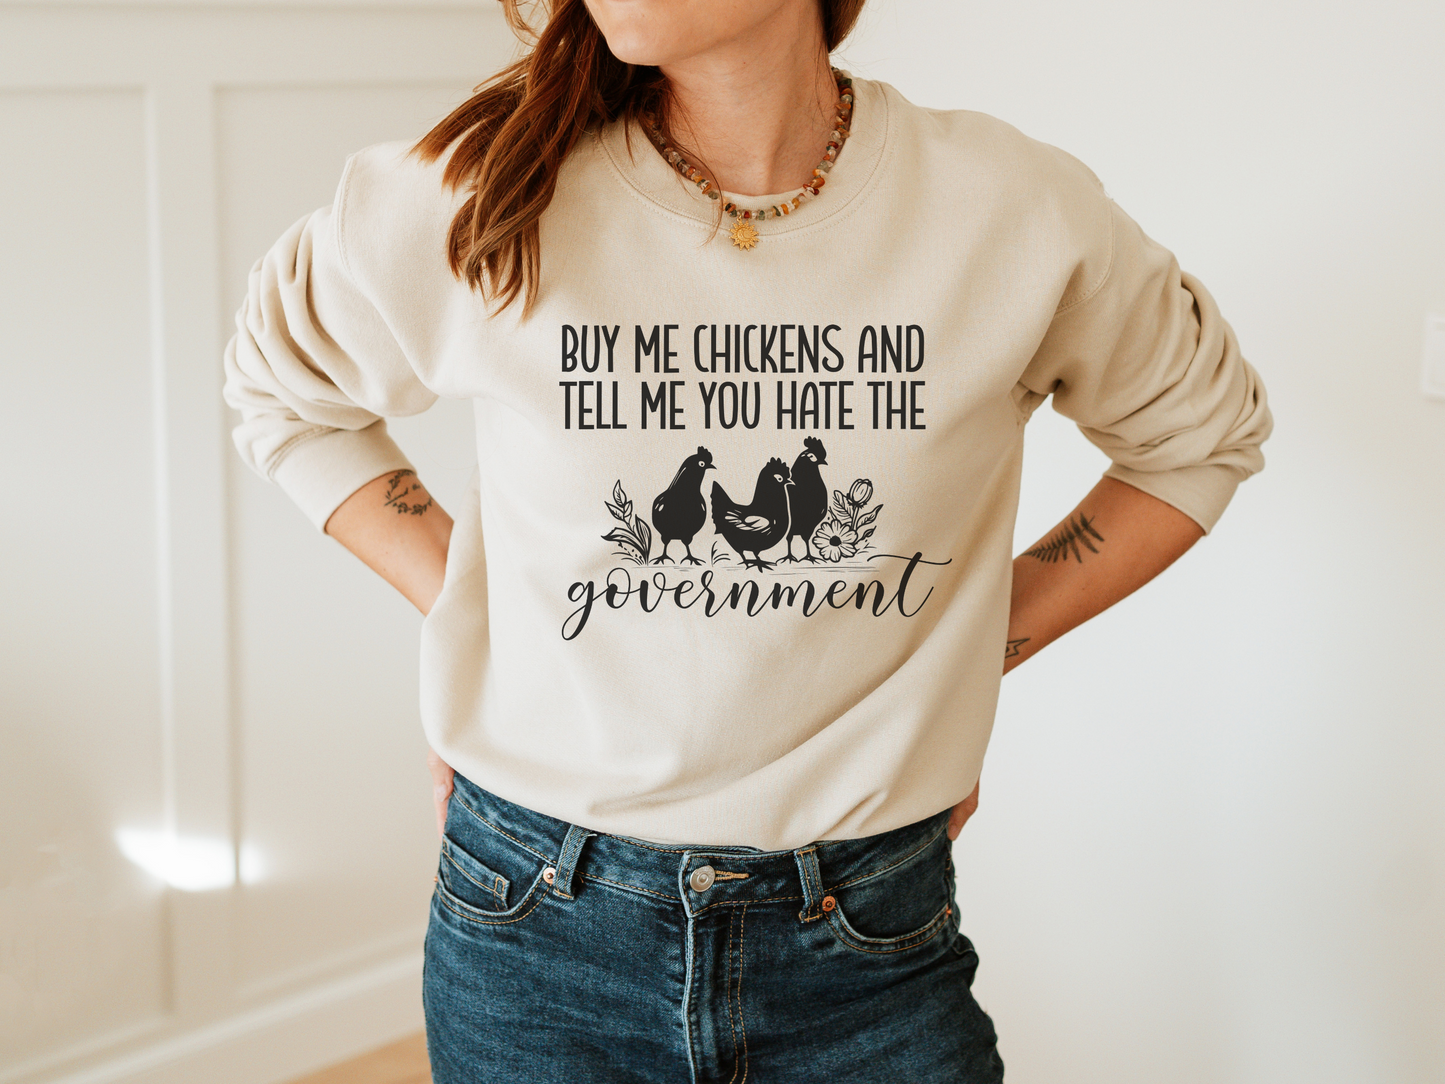 Buy Me Chickens and Tell Me You Hate The Government Shirt